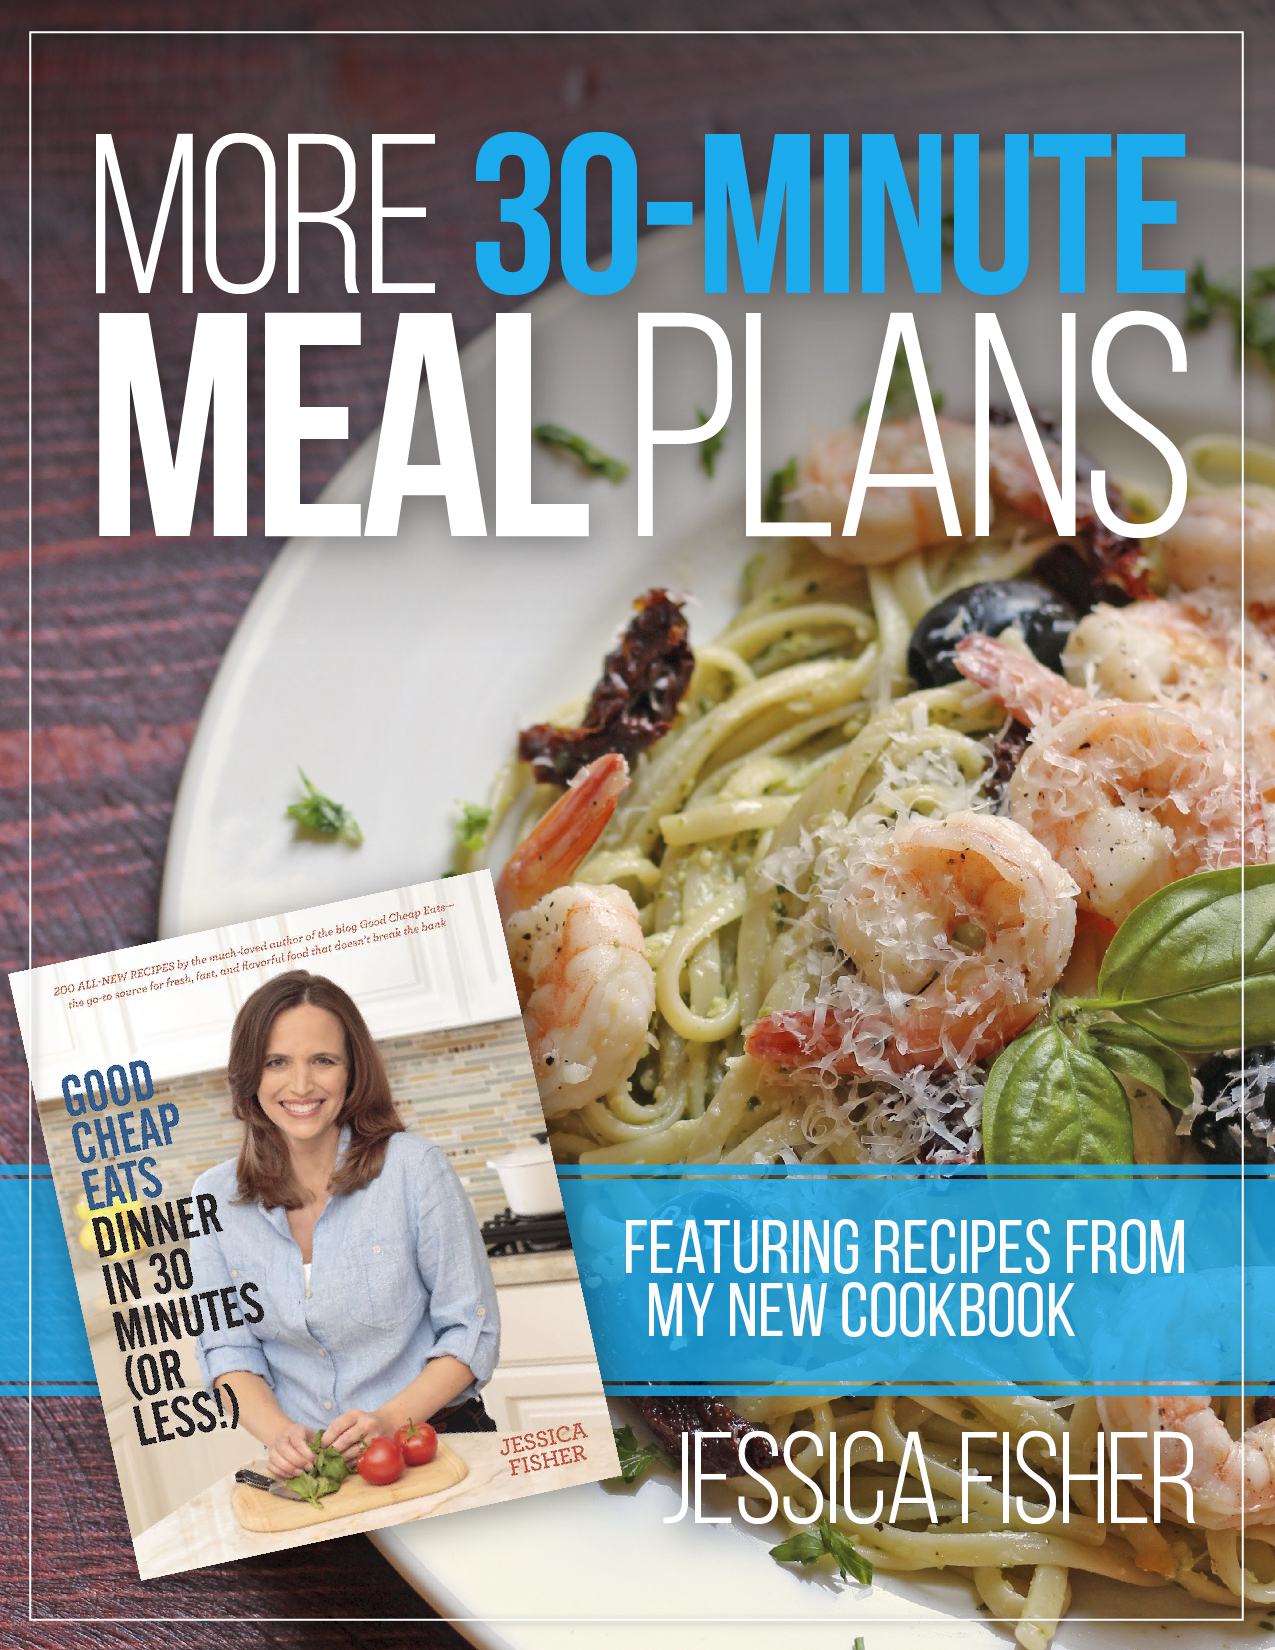 More 30-Minute Meal Plans (FREE)